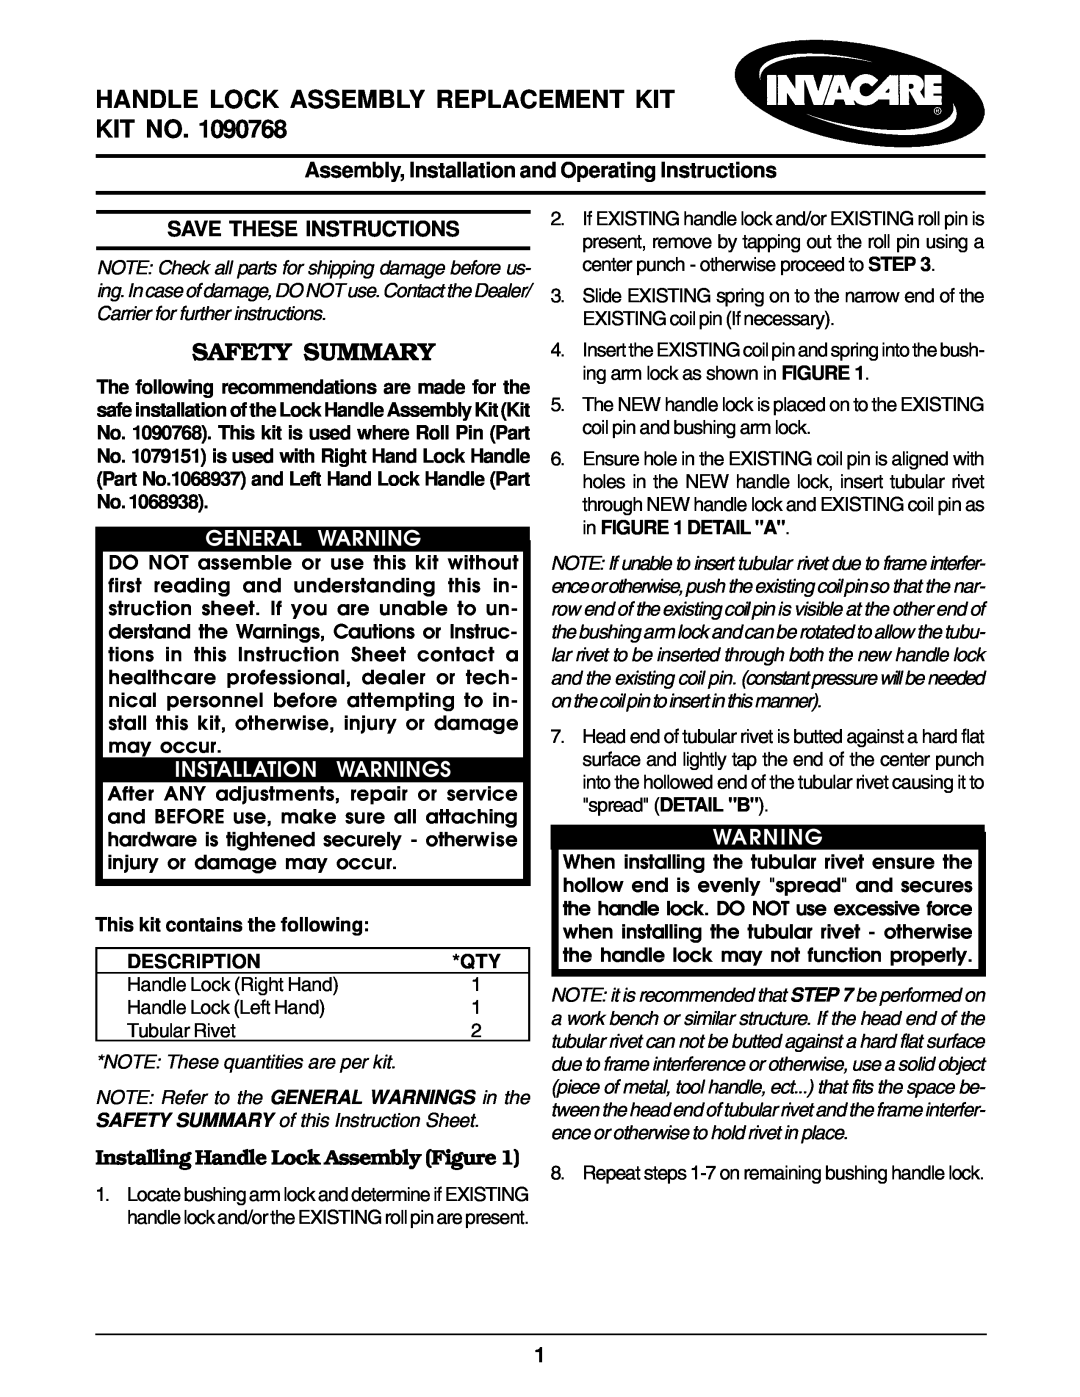 Invacare 1090768 instruction sheet Assembly, Installation and Operating Instructions, Save These Instructions, Description 